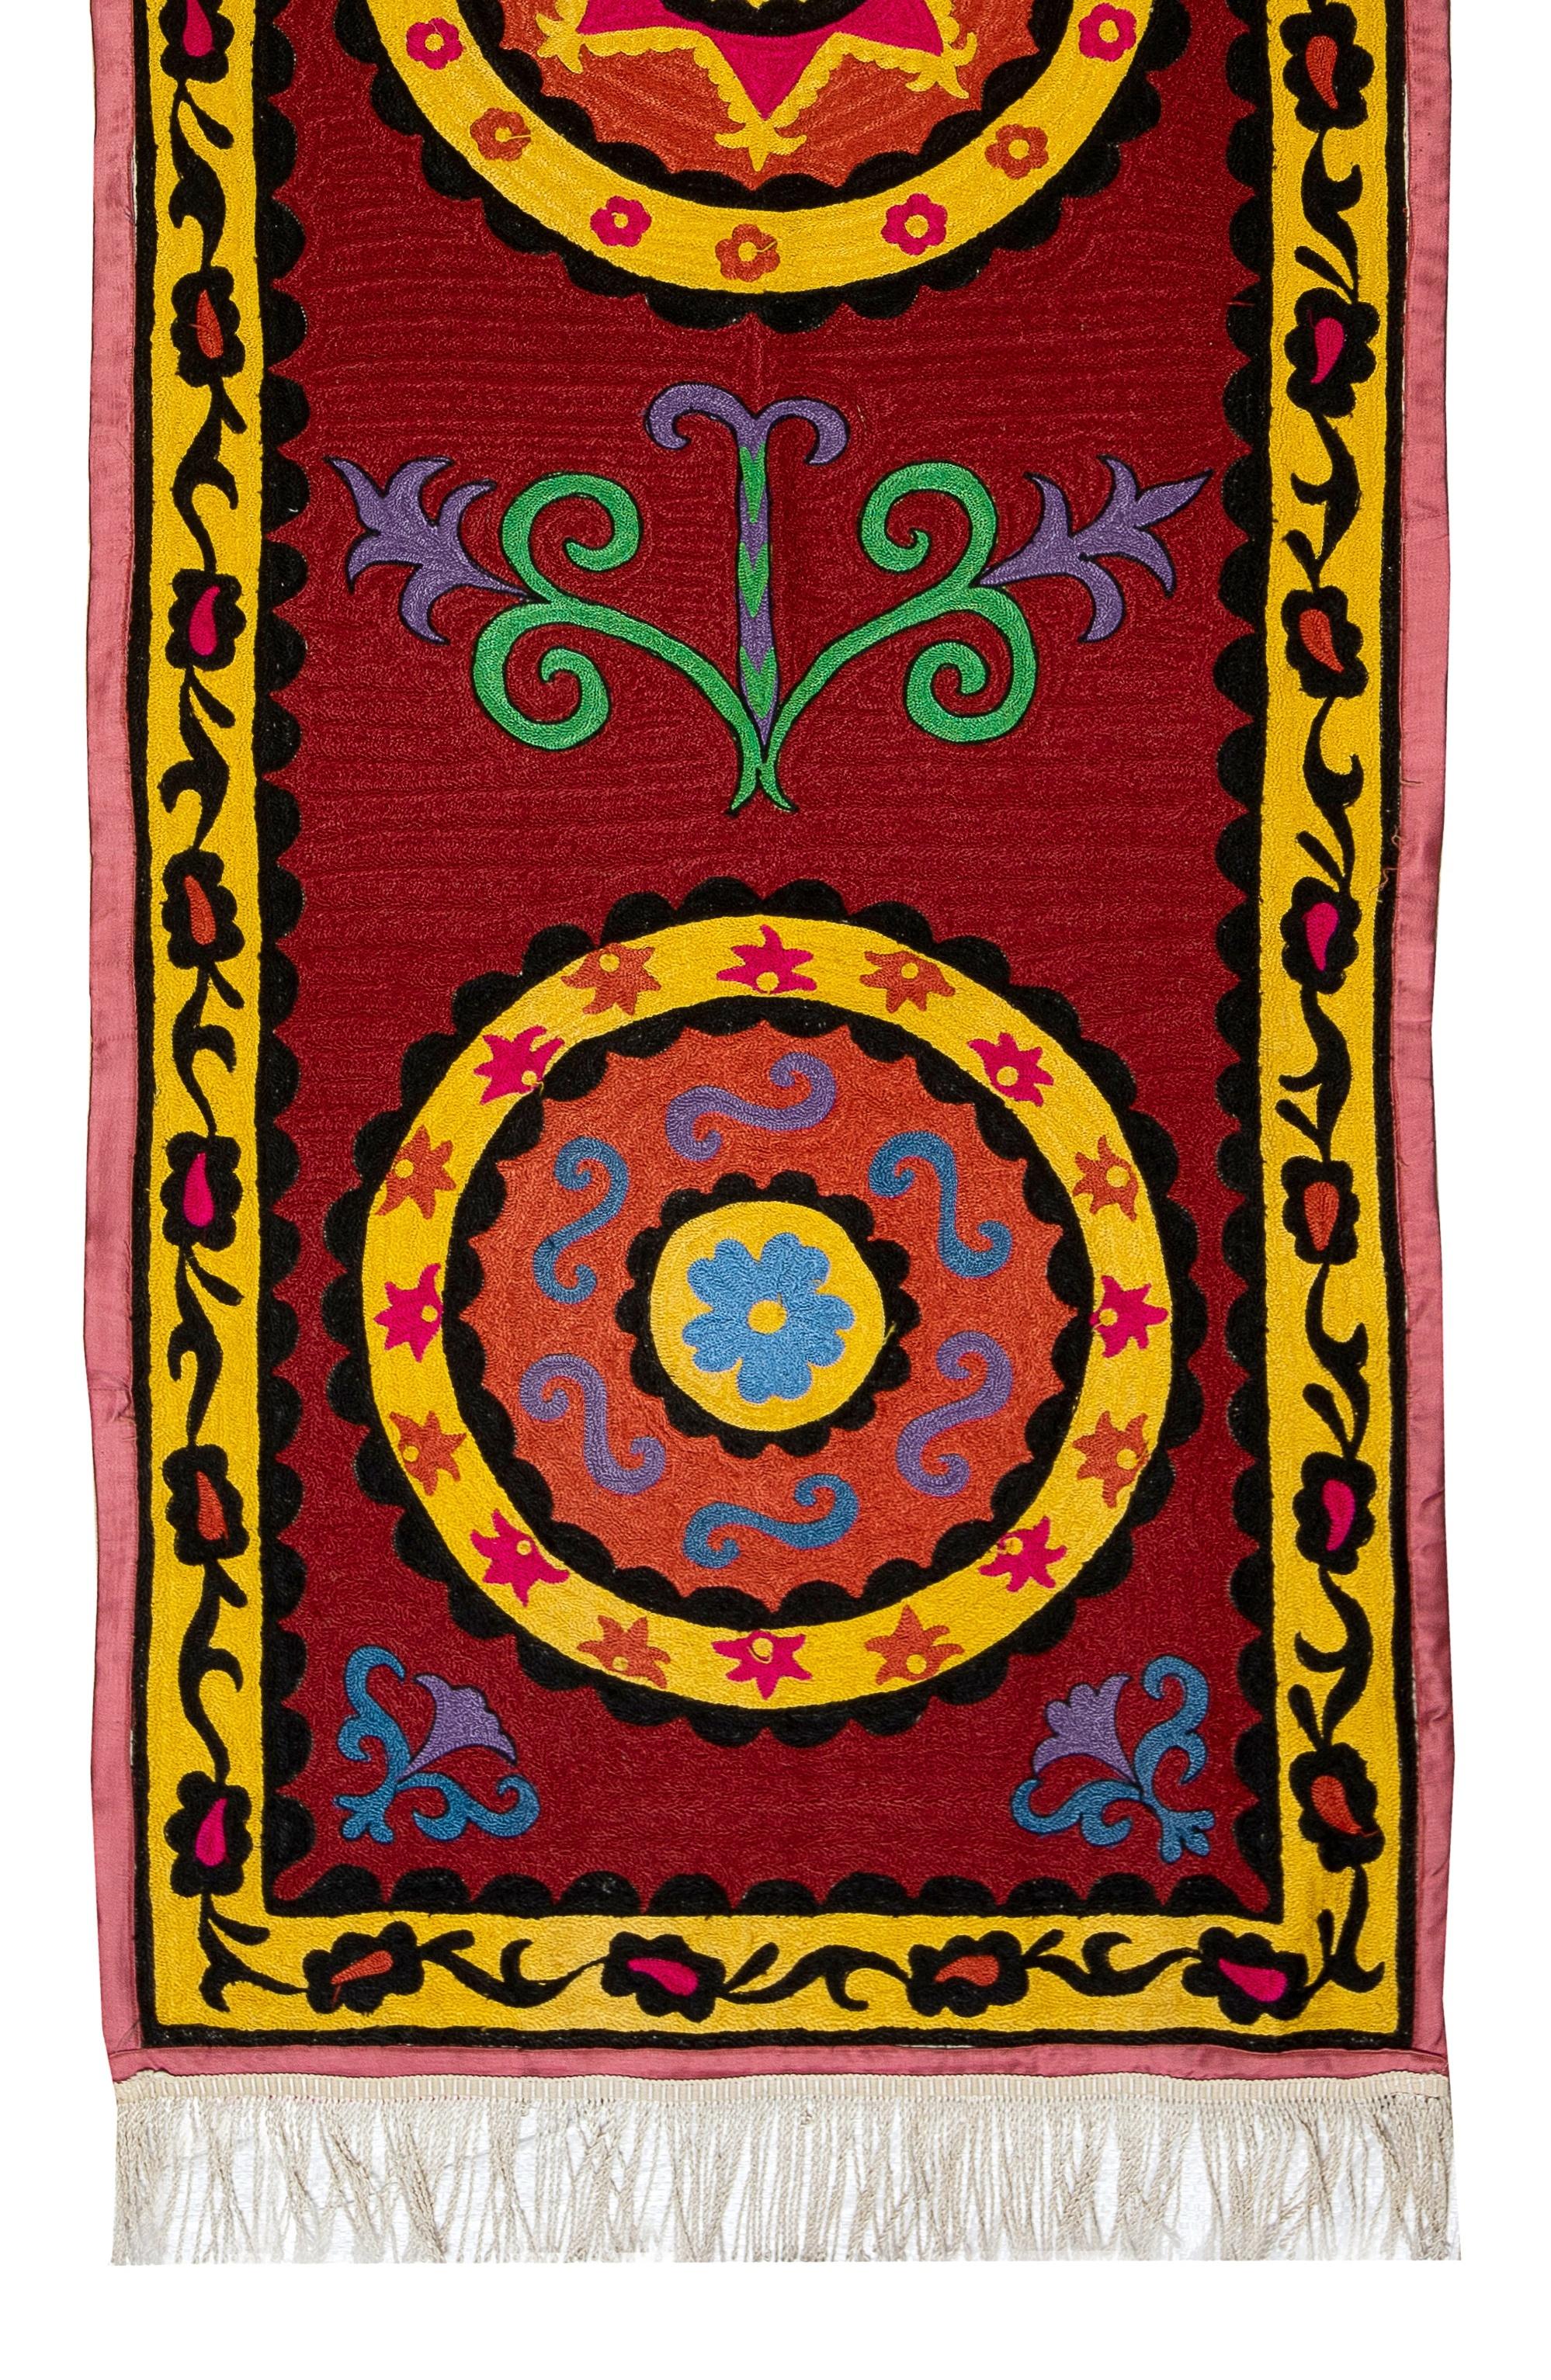 Hand-Woven 2.3x7.4 Ft Uzbek Suzani Wall Hanging, Handmade Silk Embroidery Table Runner For Sale